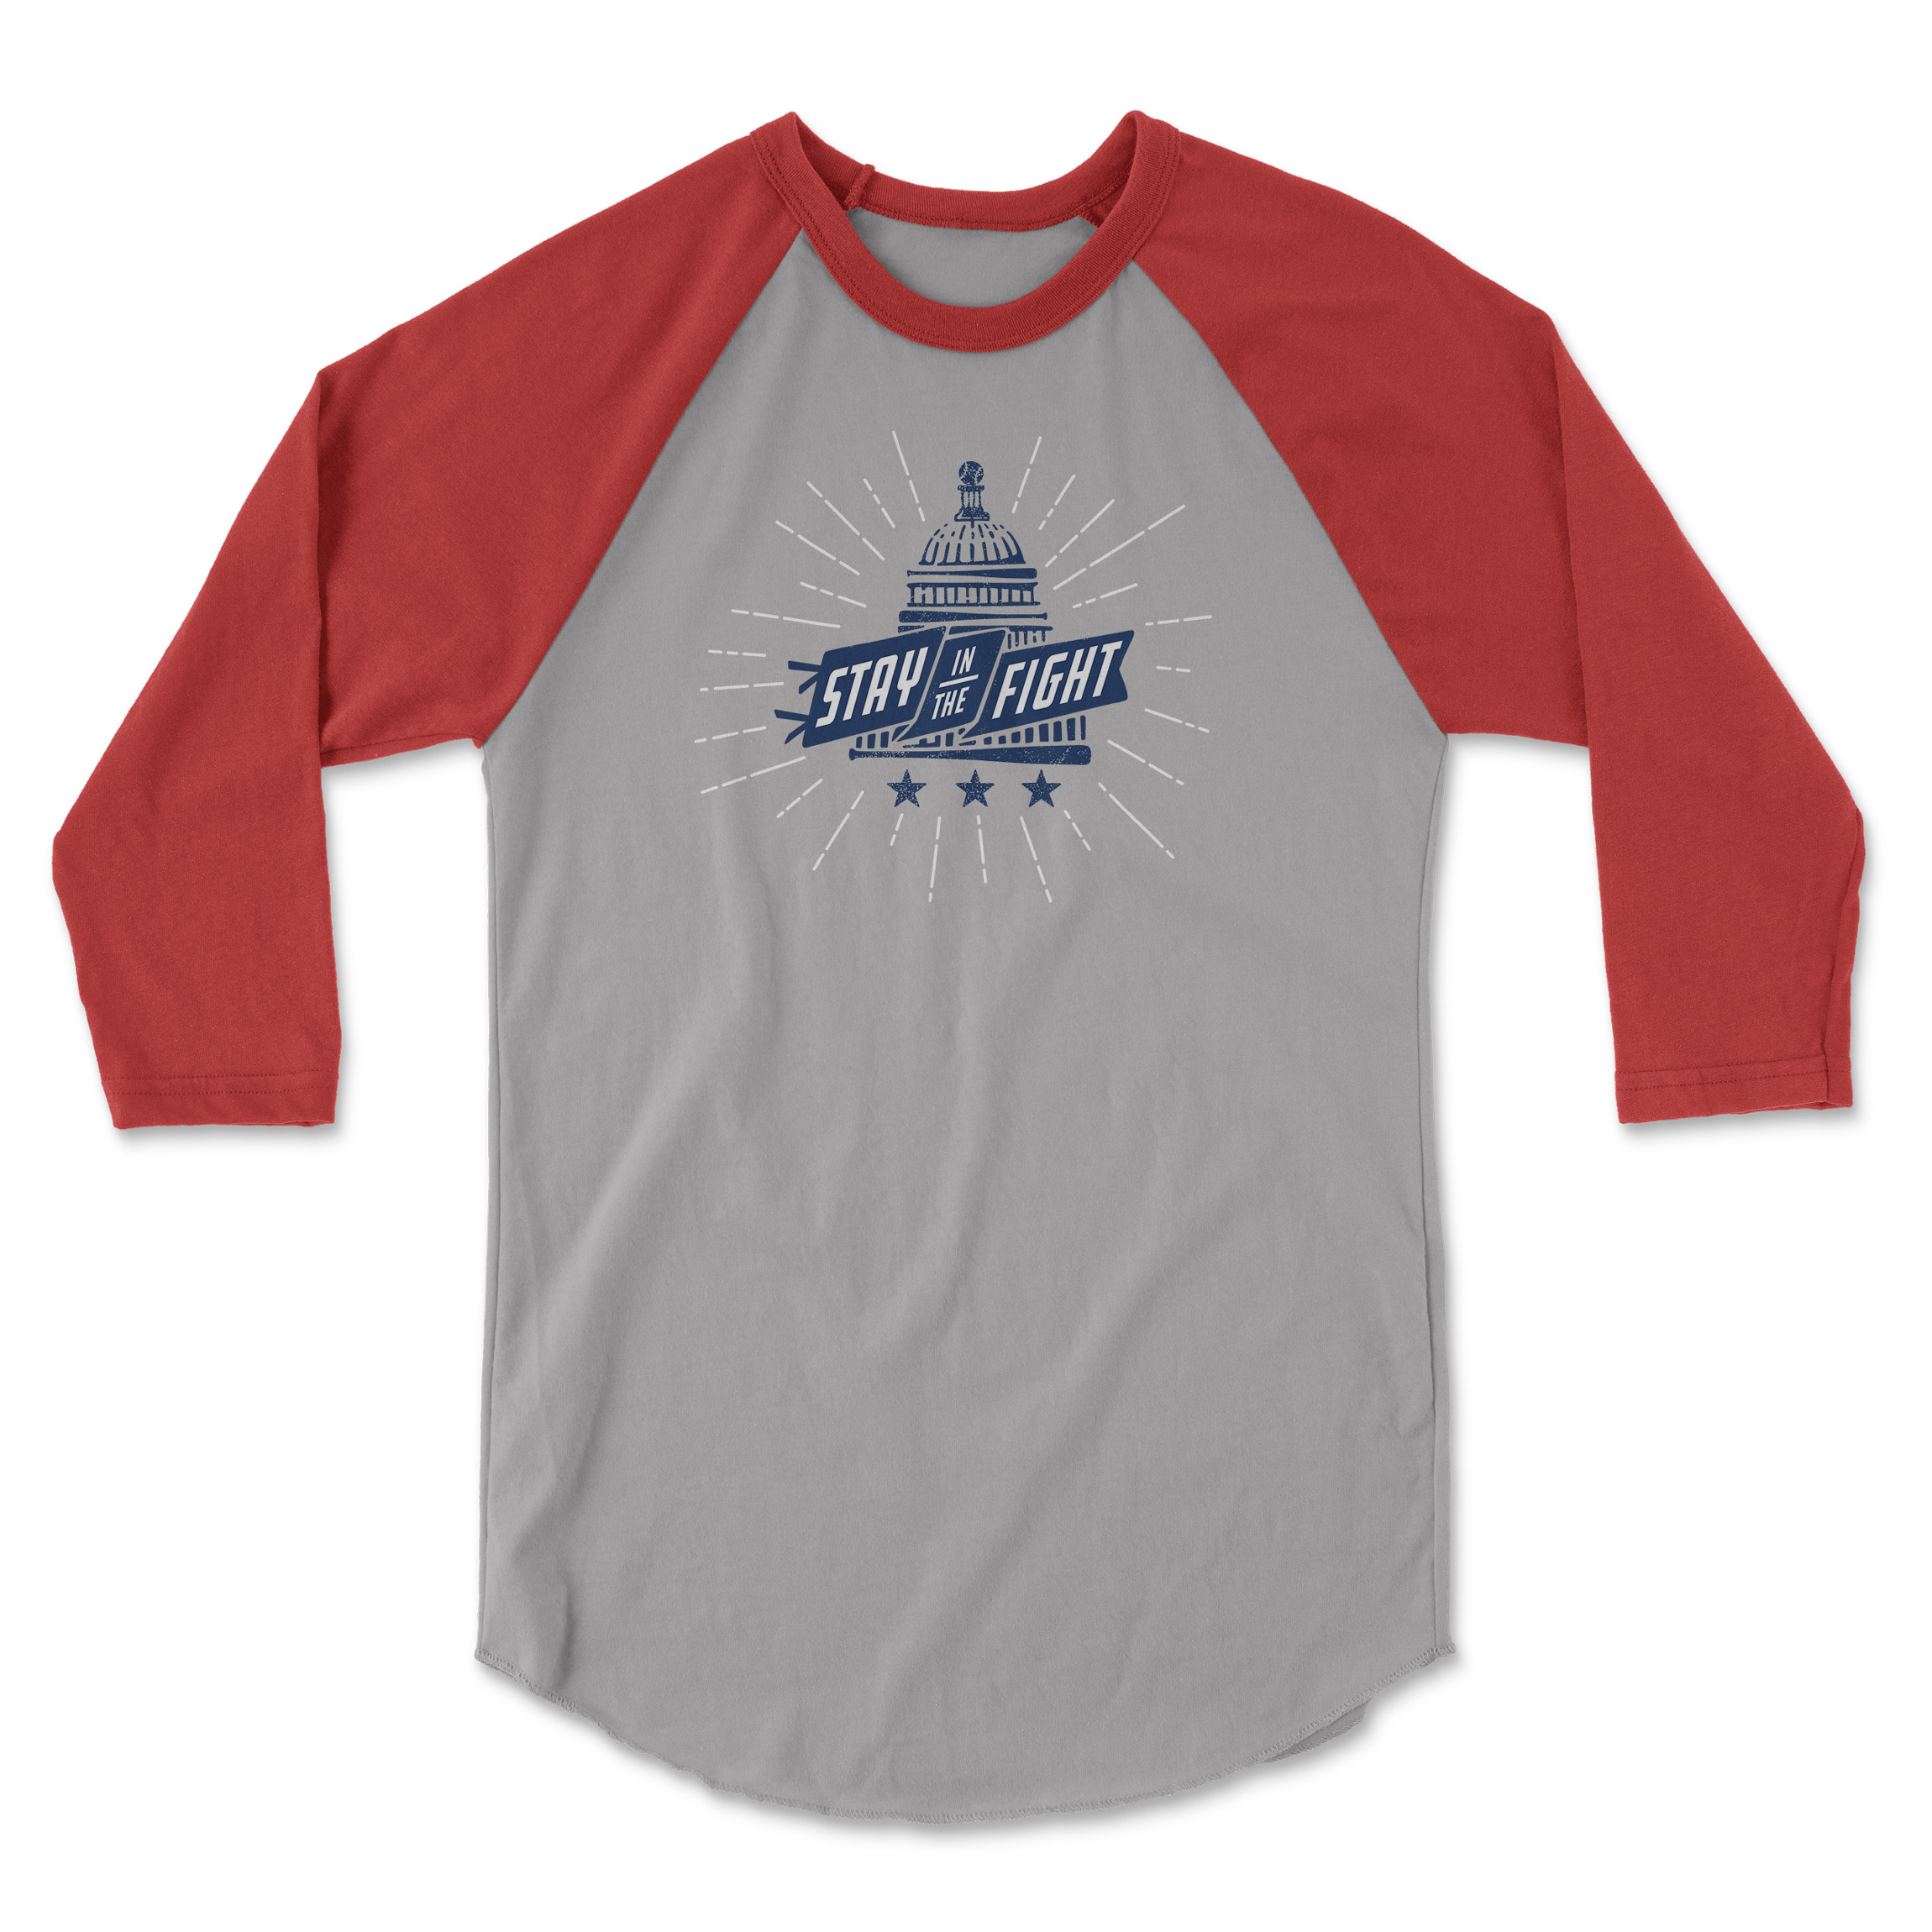 nationals stay in the fight shirt